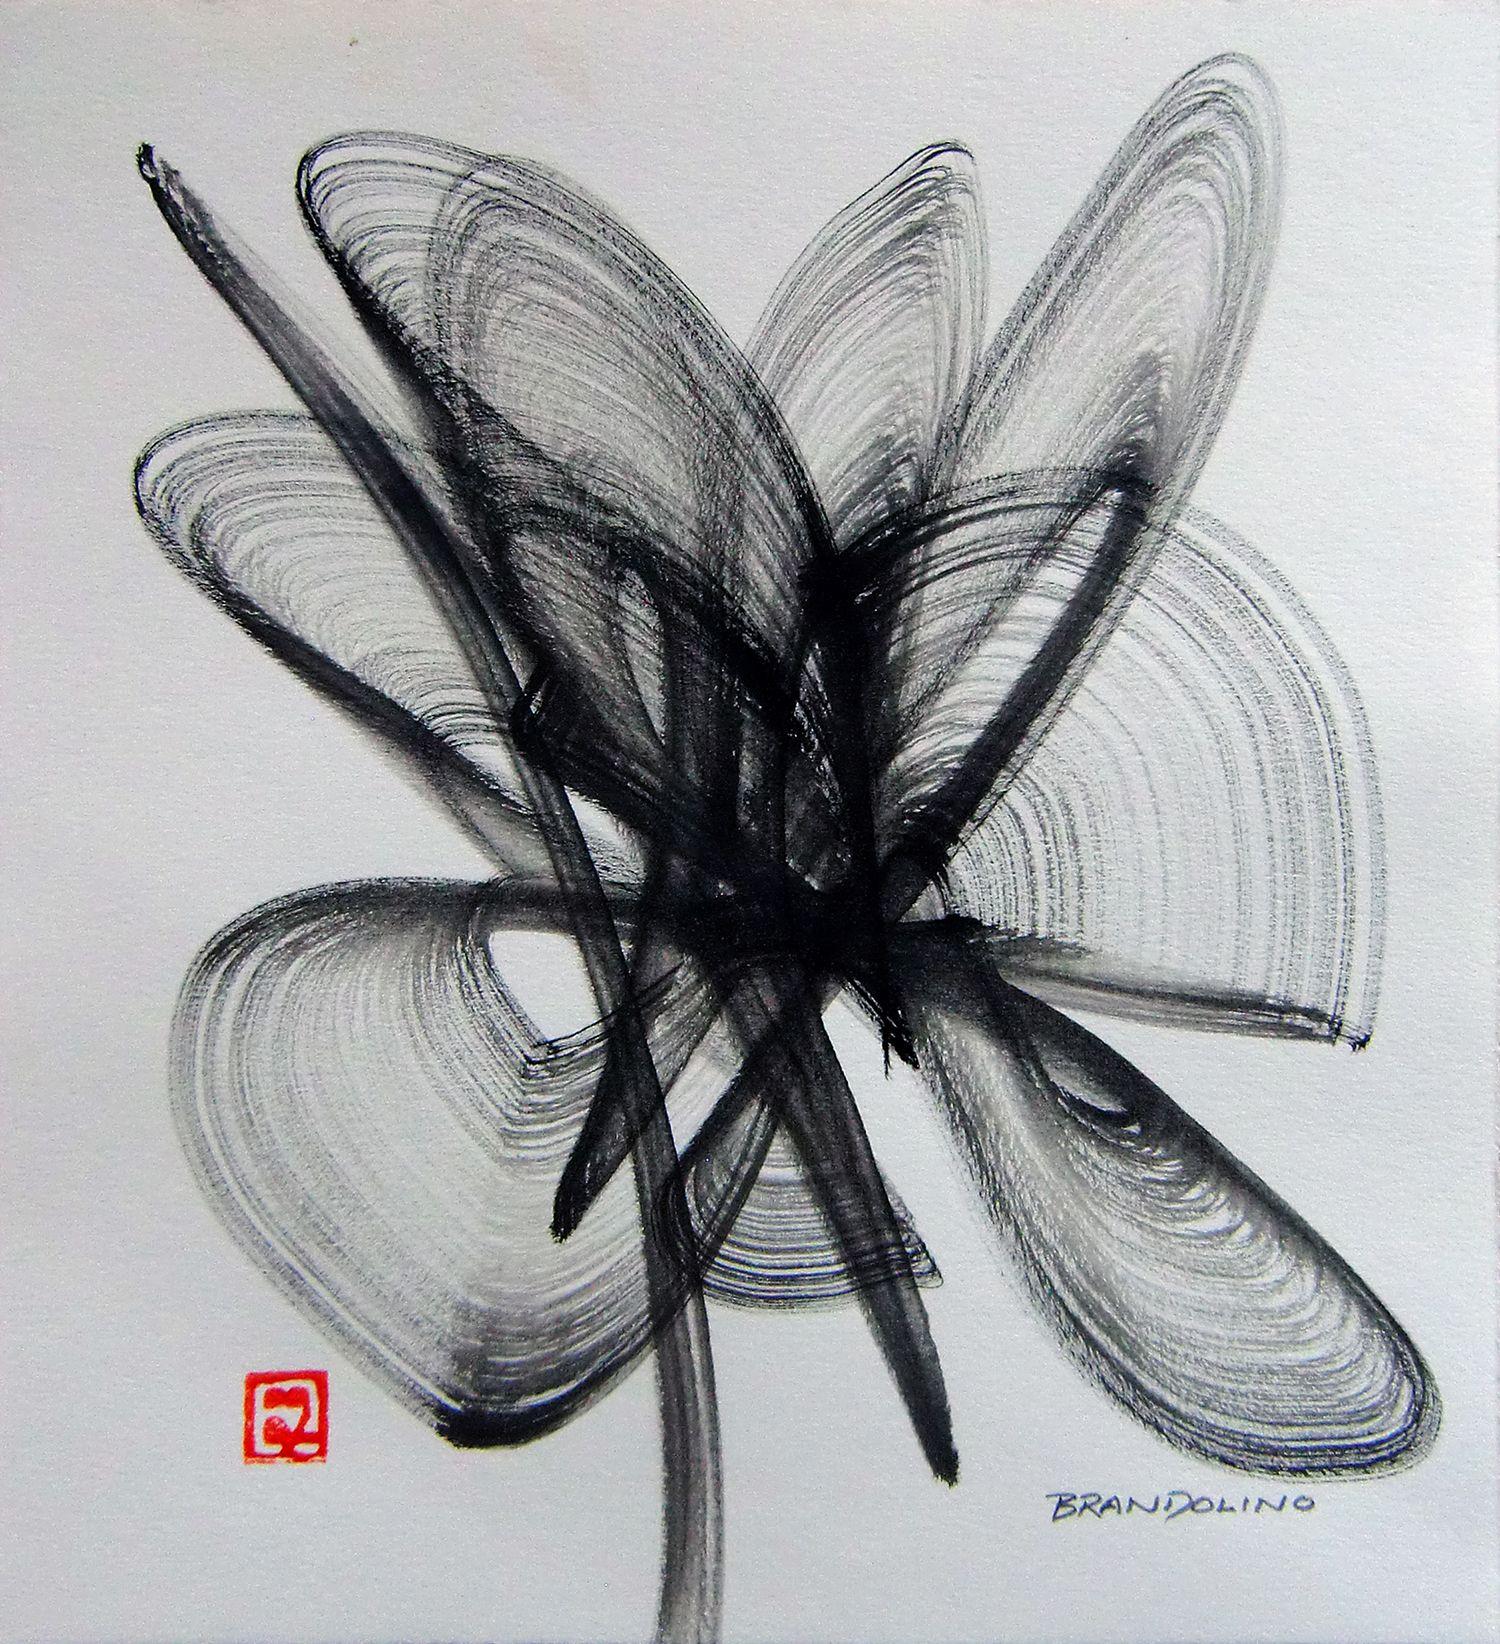 Ray Brandolino Abstract Drawing - Brush Dance Series No. 21, Drawing, Pen & Ink on Paper